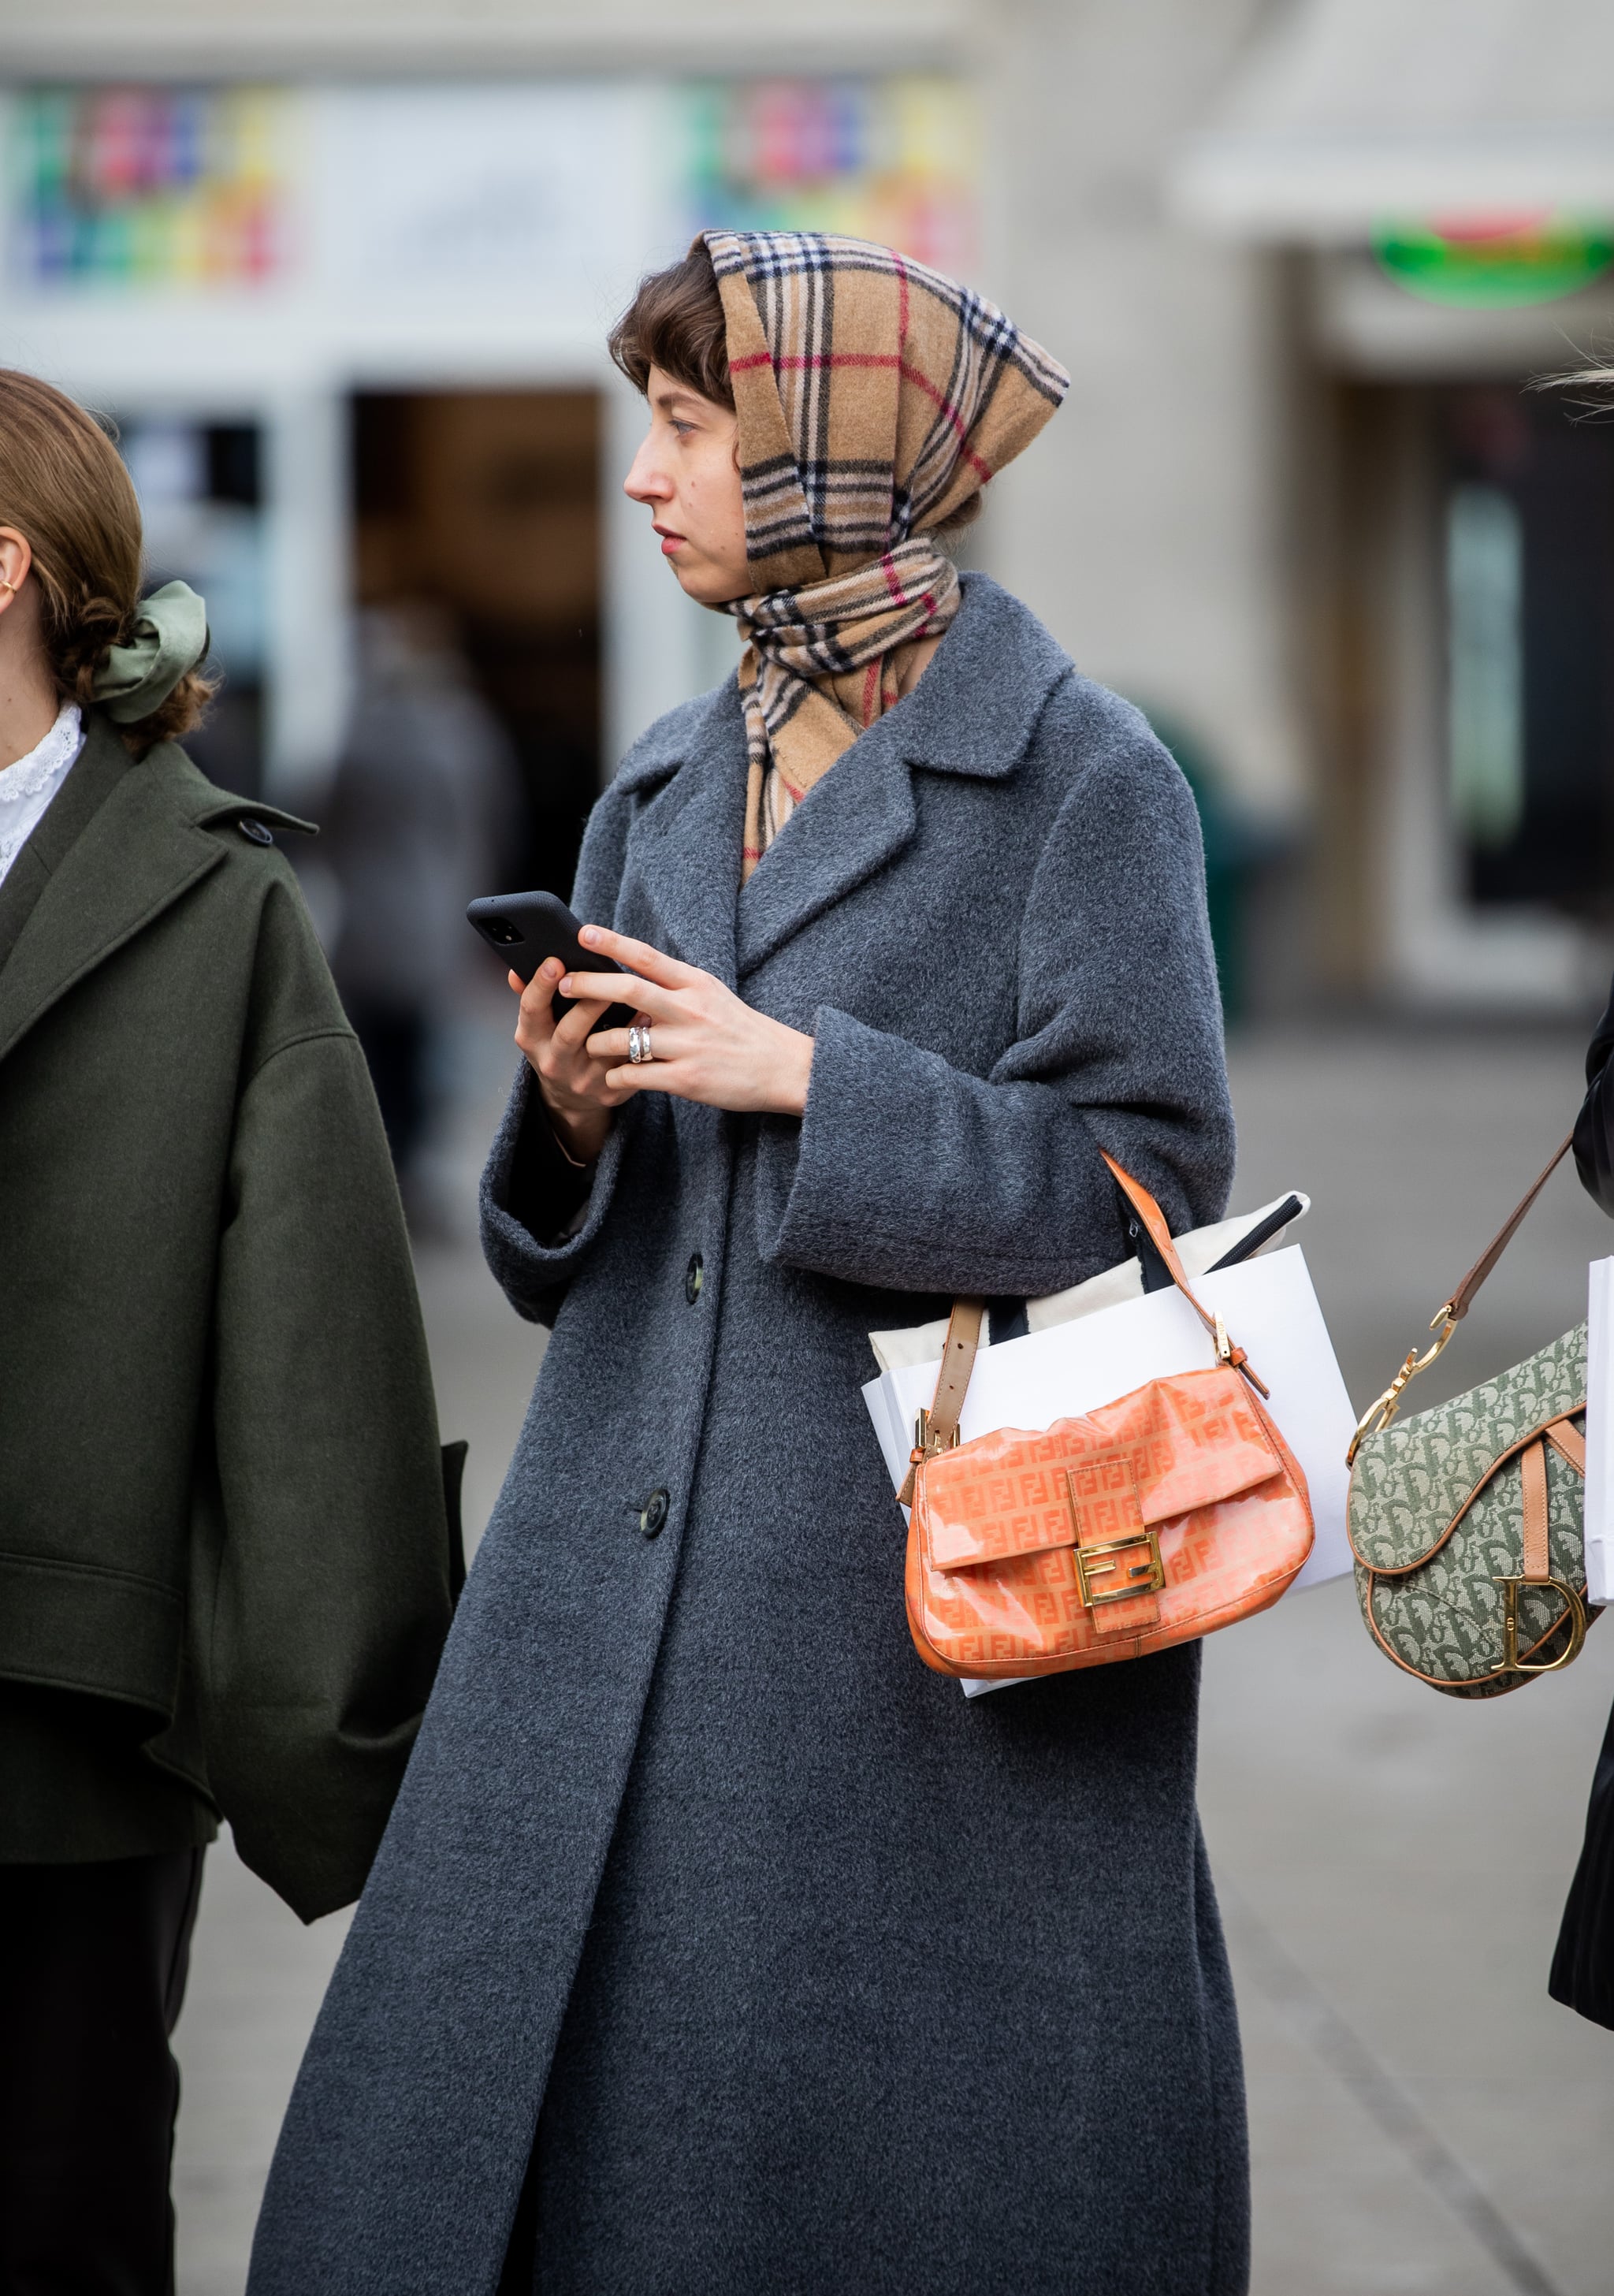 Winter Outfit Ideas For Styling Your Blanket Scarf